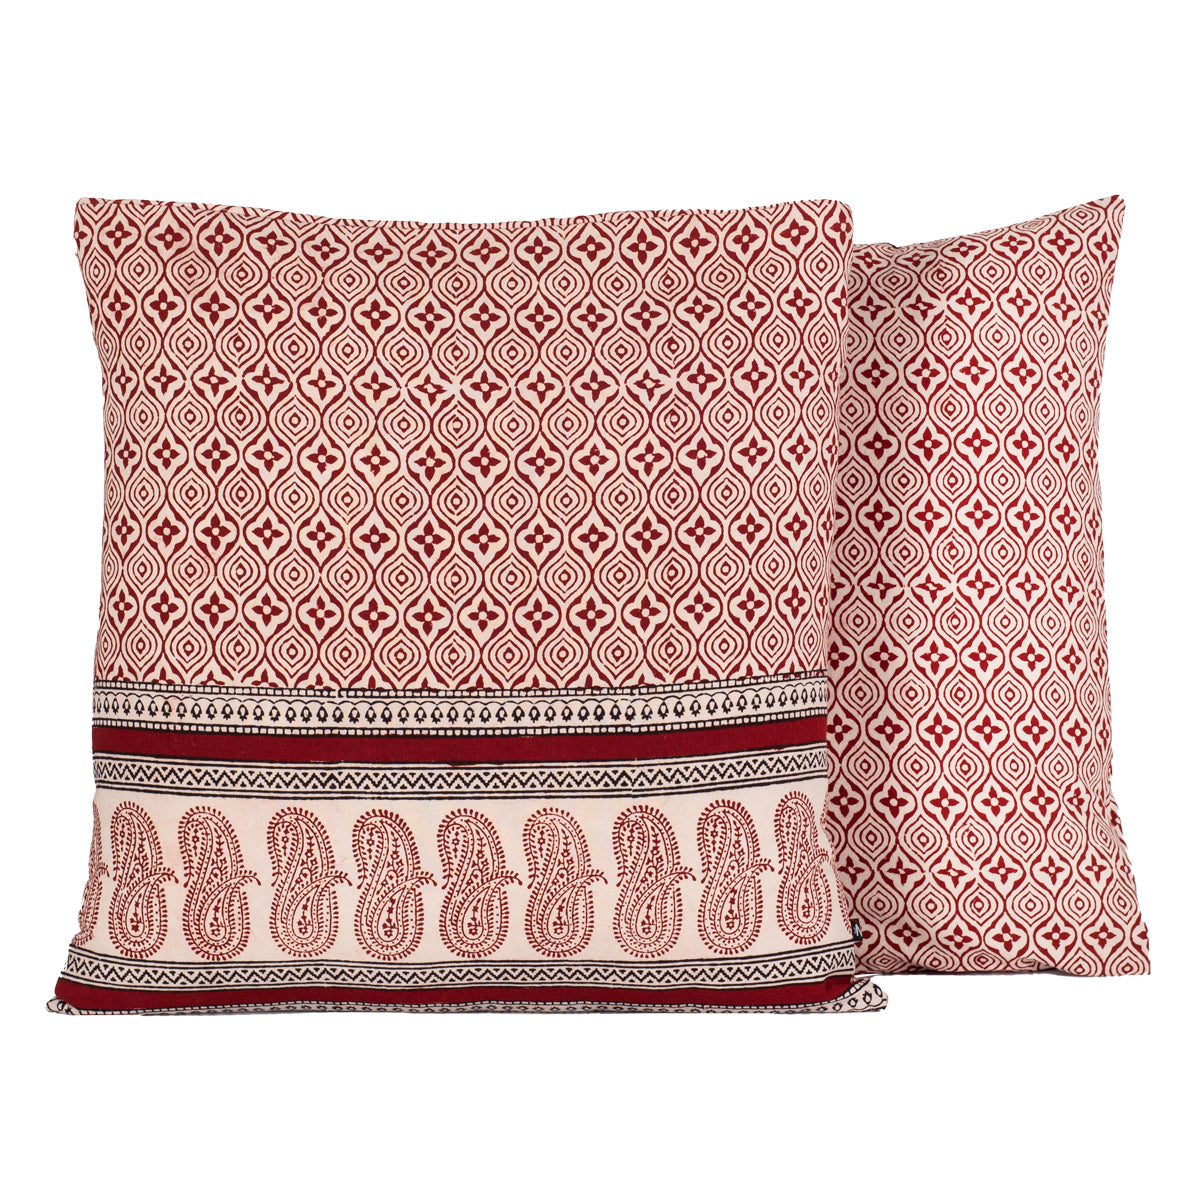 Geometric Pattern with Paisley Border Bagh Hand Block Print Cotton Cushion Cover - Red Black-2